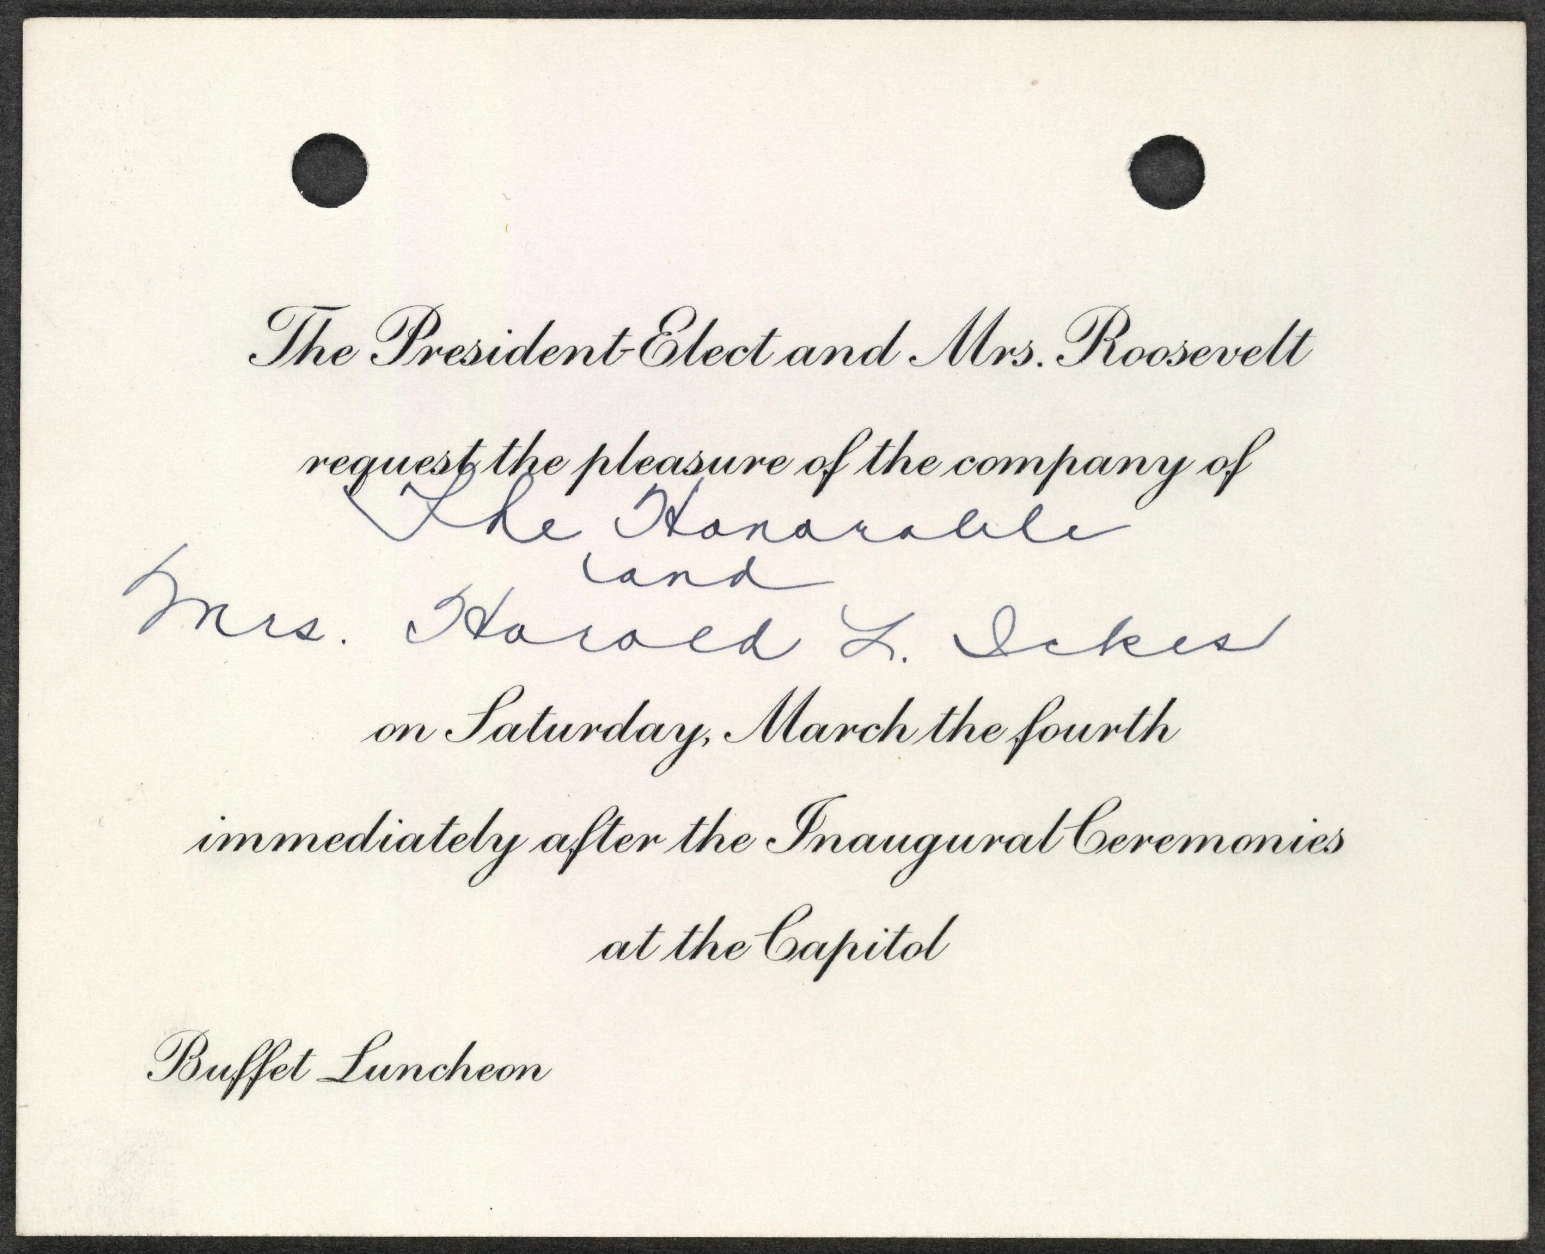 Invitation to White House Luncheon Buffet, March 4, 1933.
